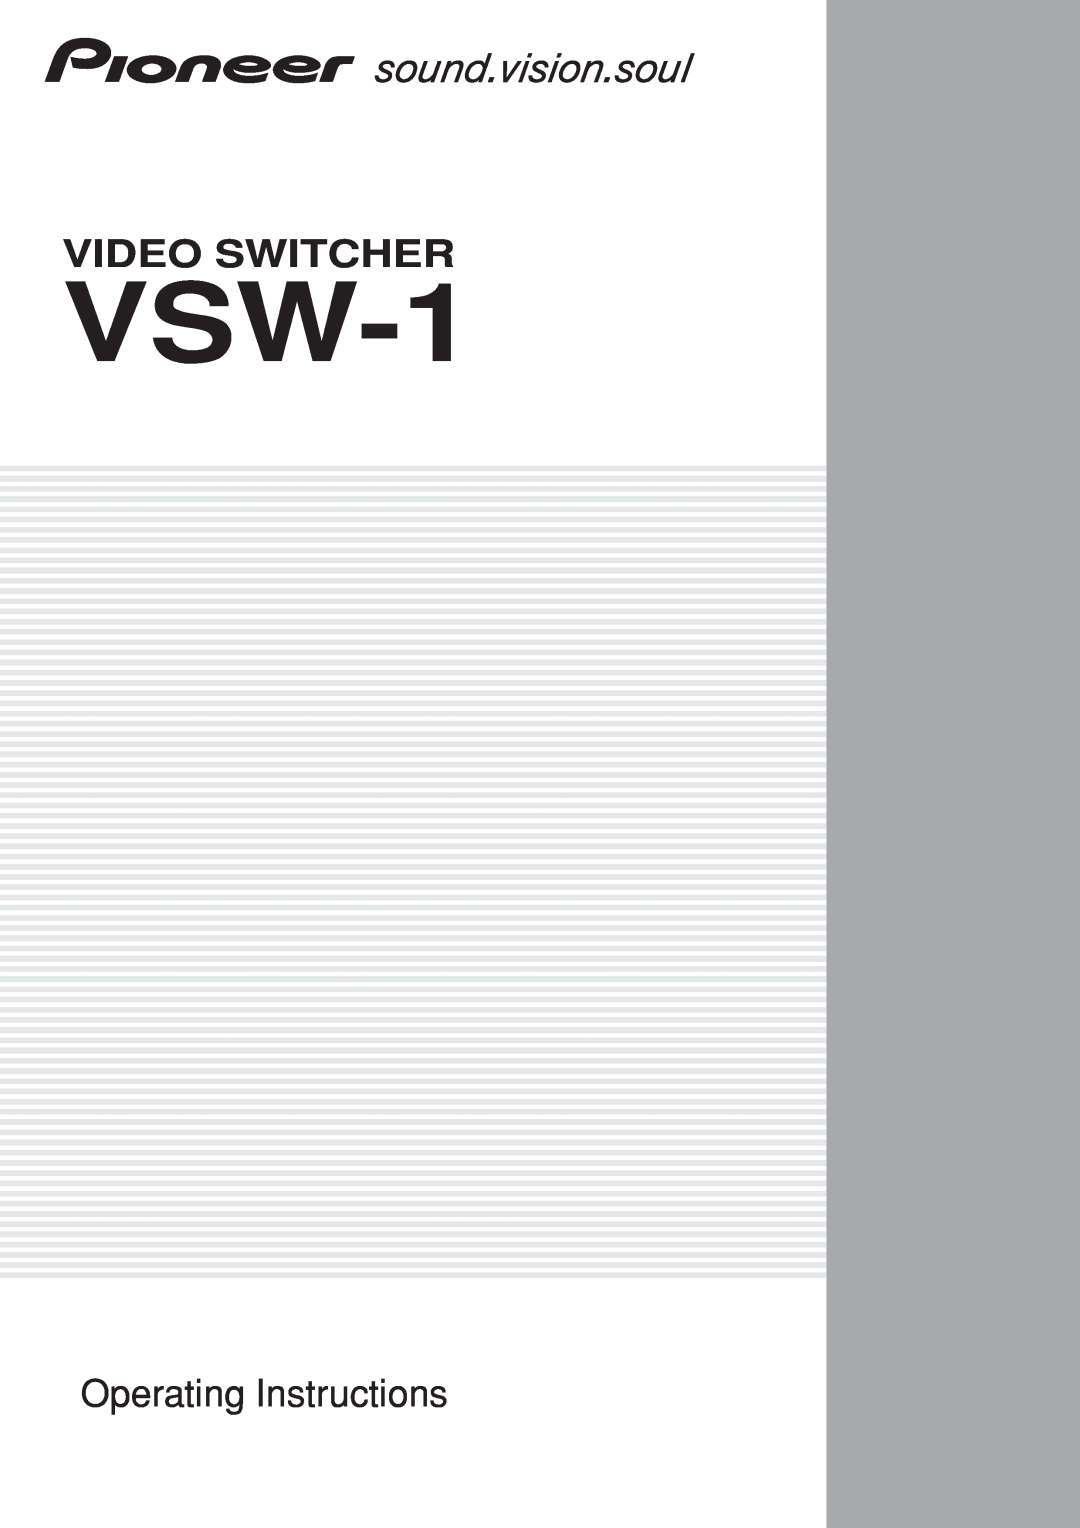 Pioneer VSW-1 2 manual Operating Instructions, Video Switcher 